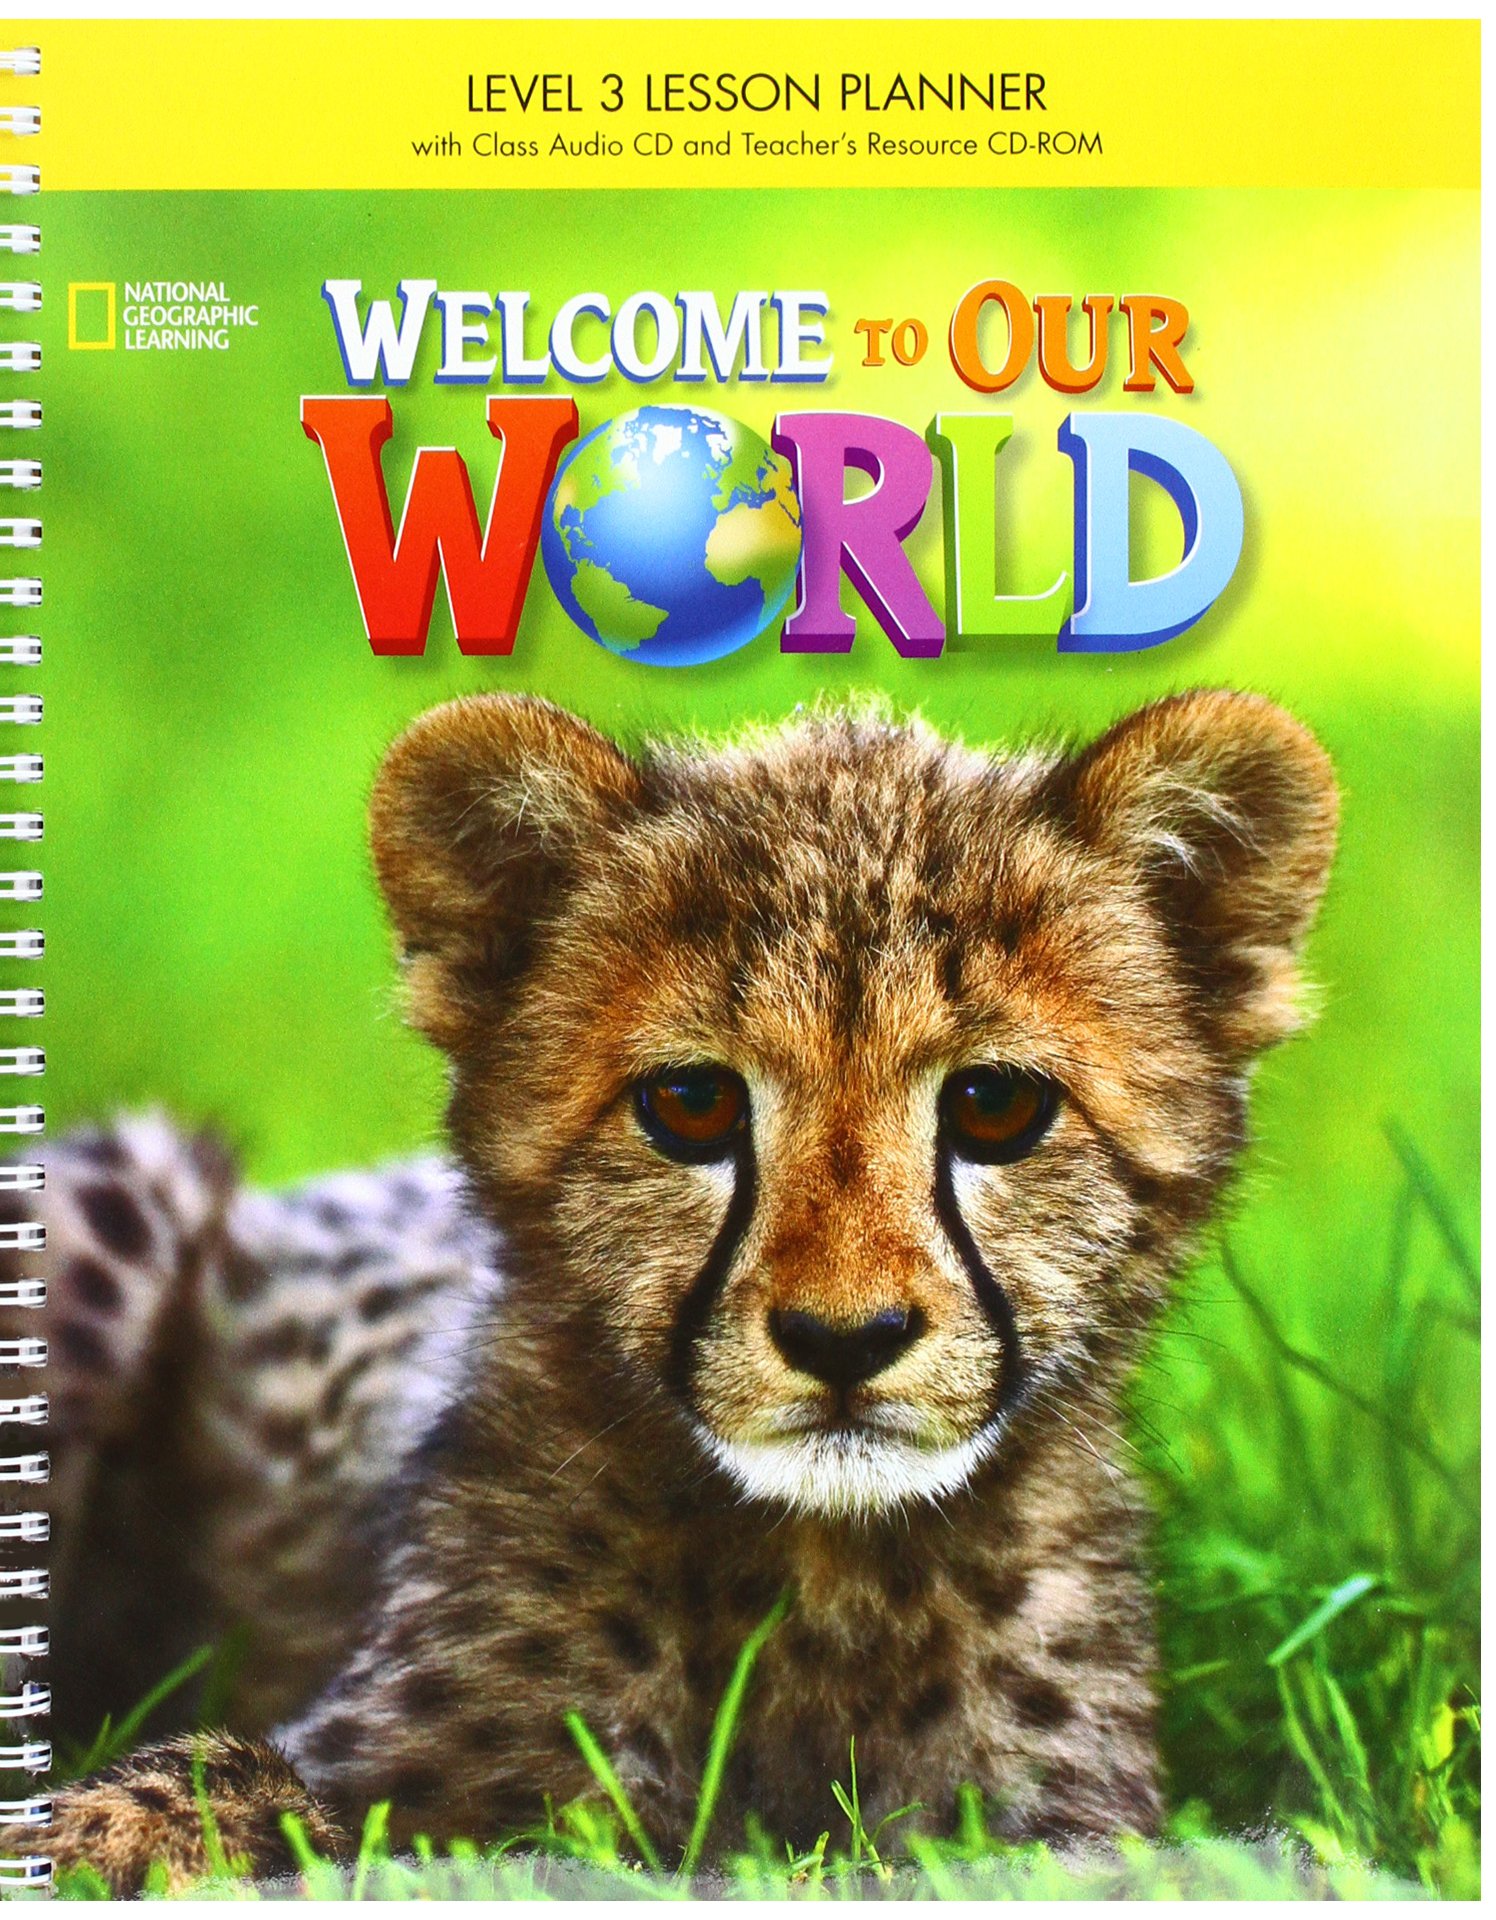 Welcome to Our World 3 Lesson Planner + Class CD + CD-ROM / Книга для учителя